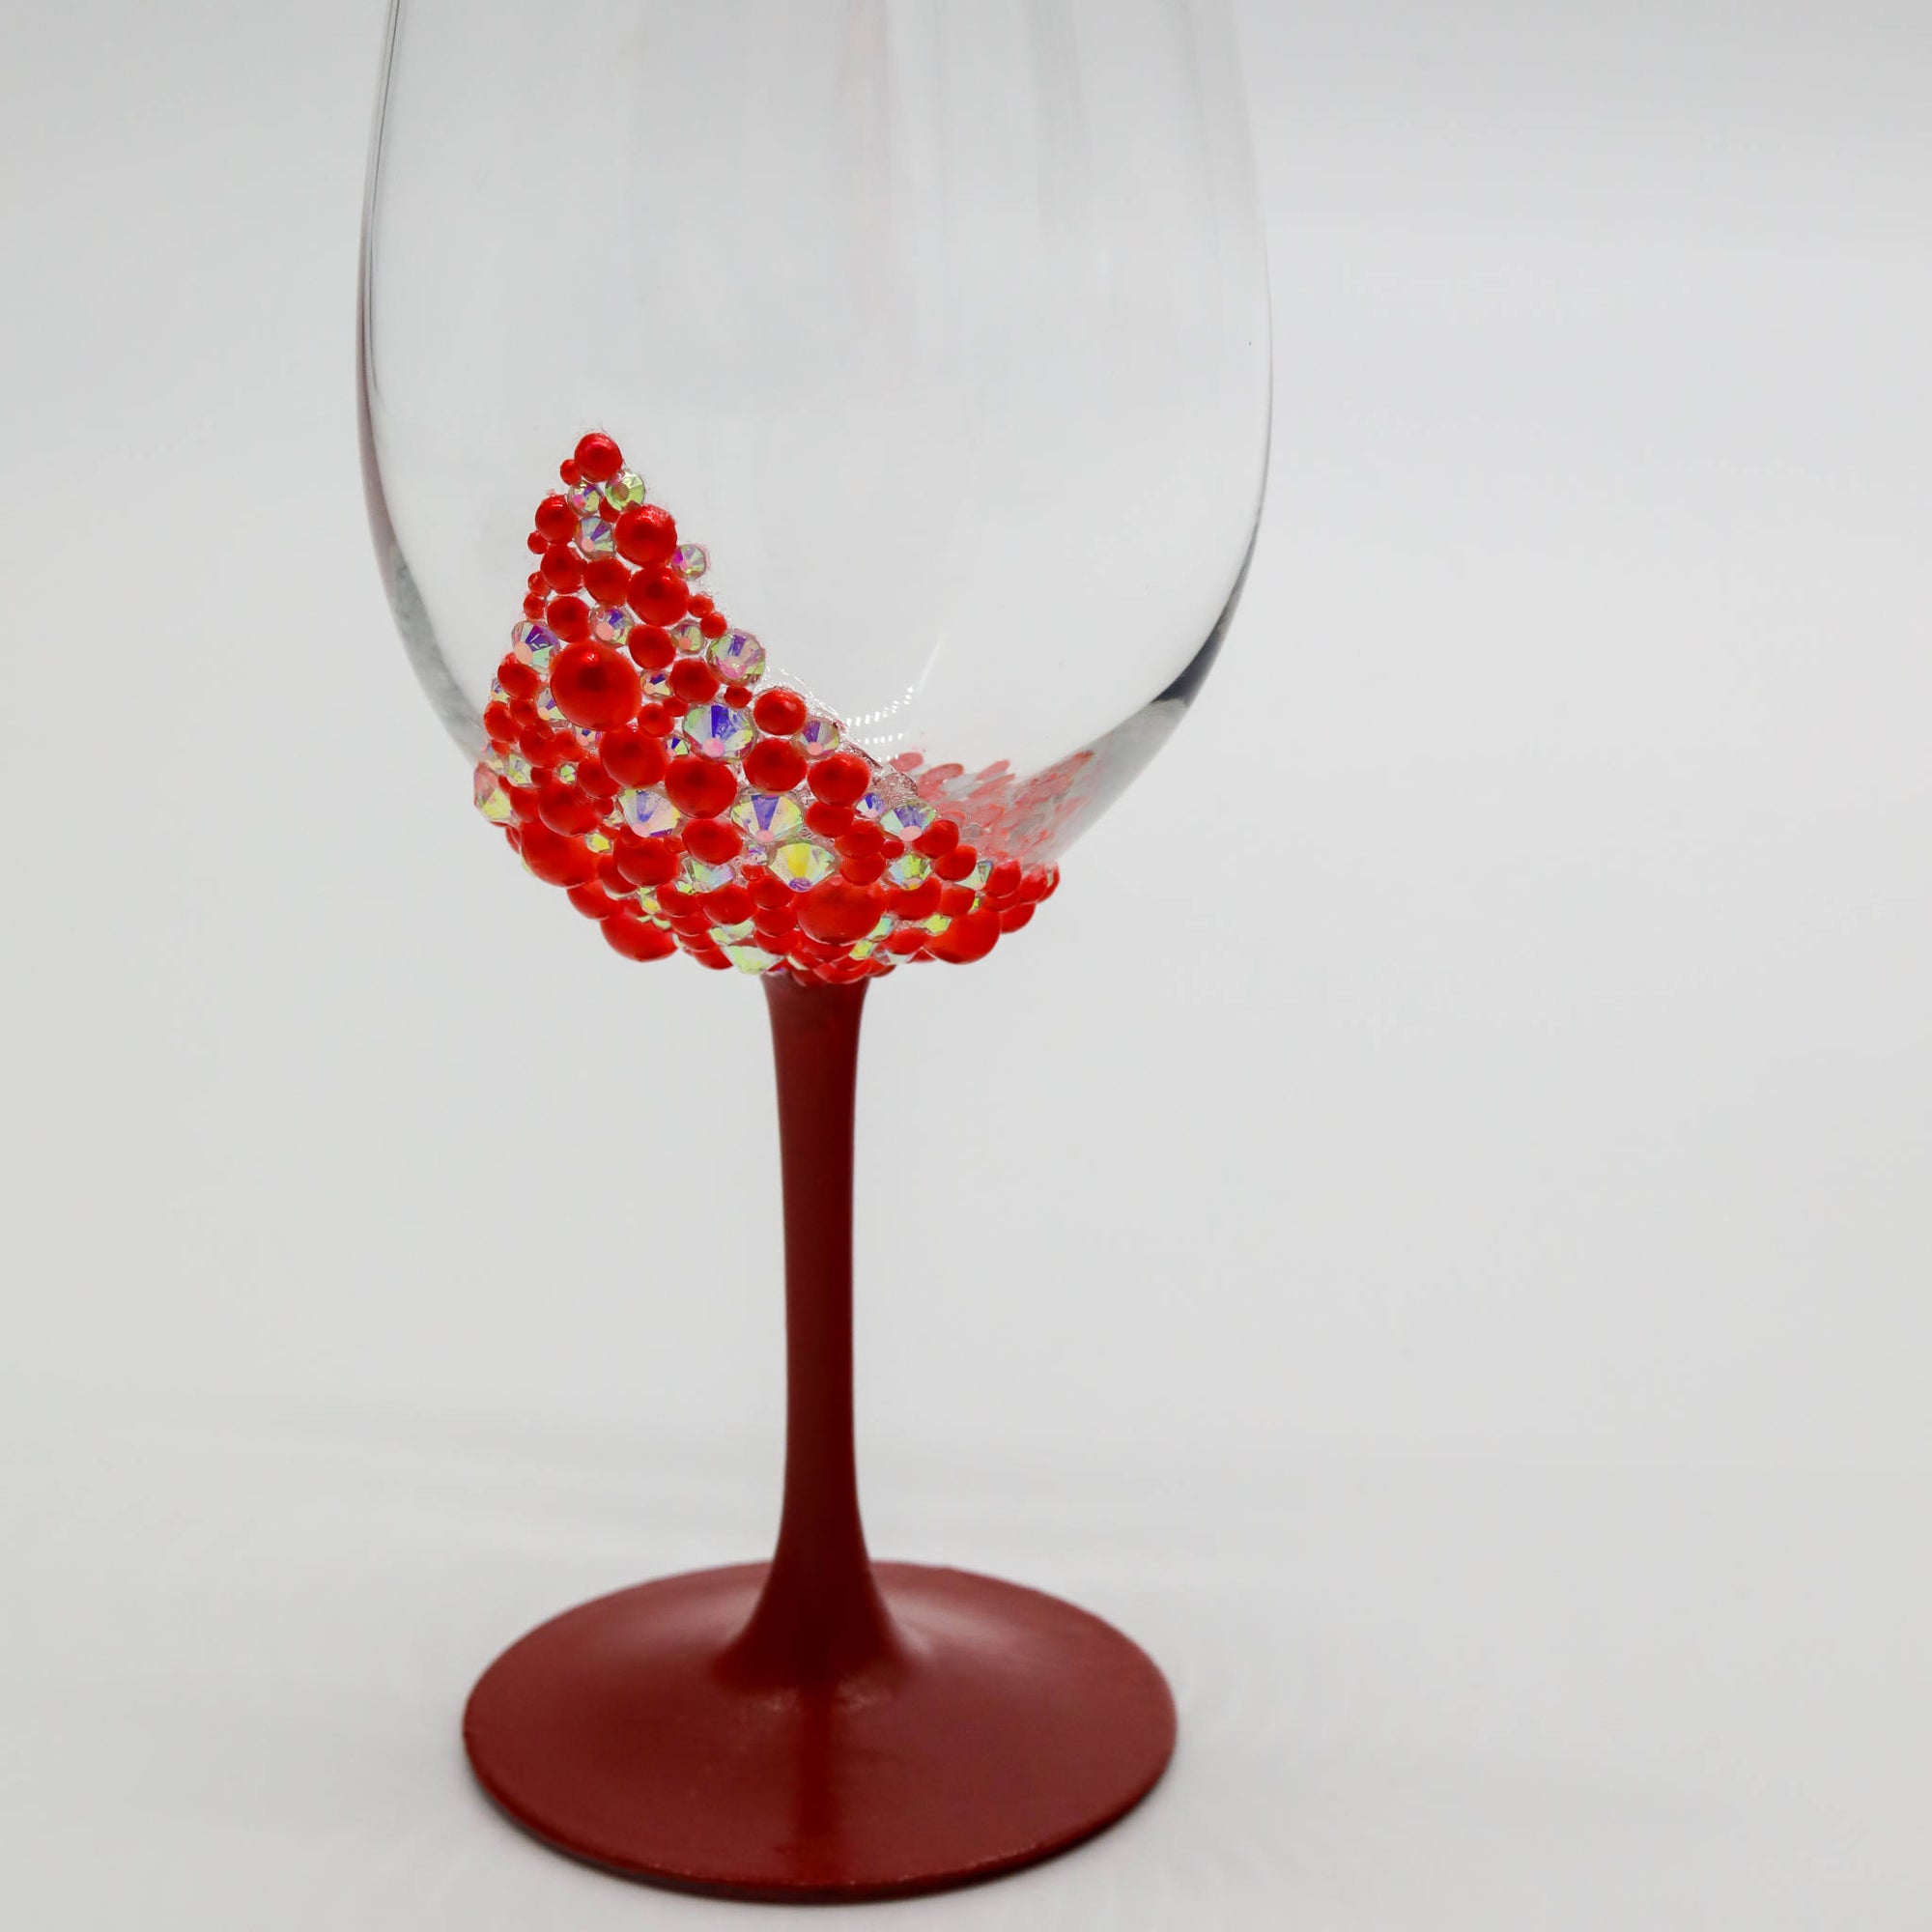  DAQQ Red Wine Glasses Set of 2 Hand Painted Designed